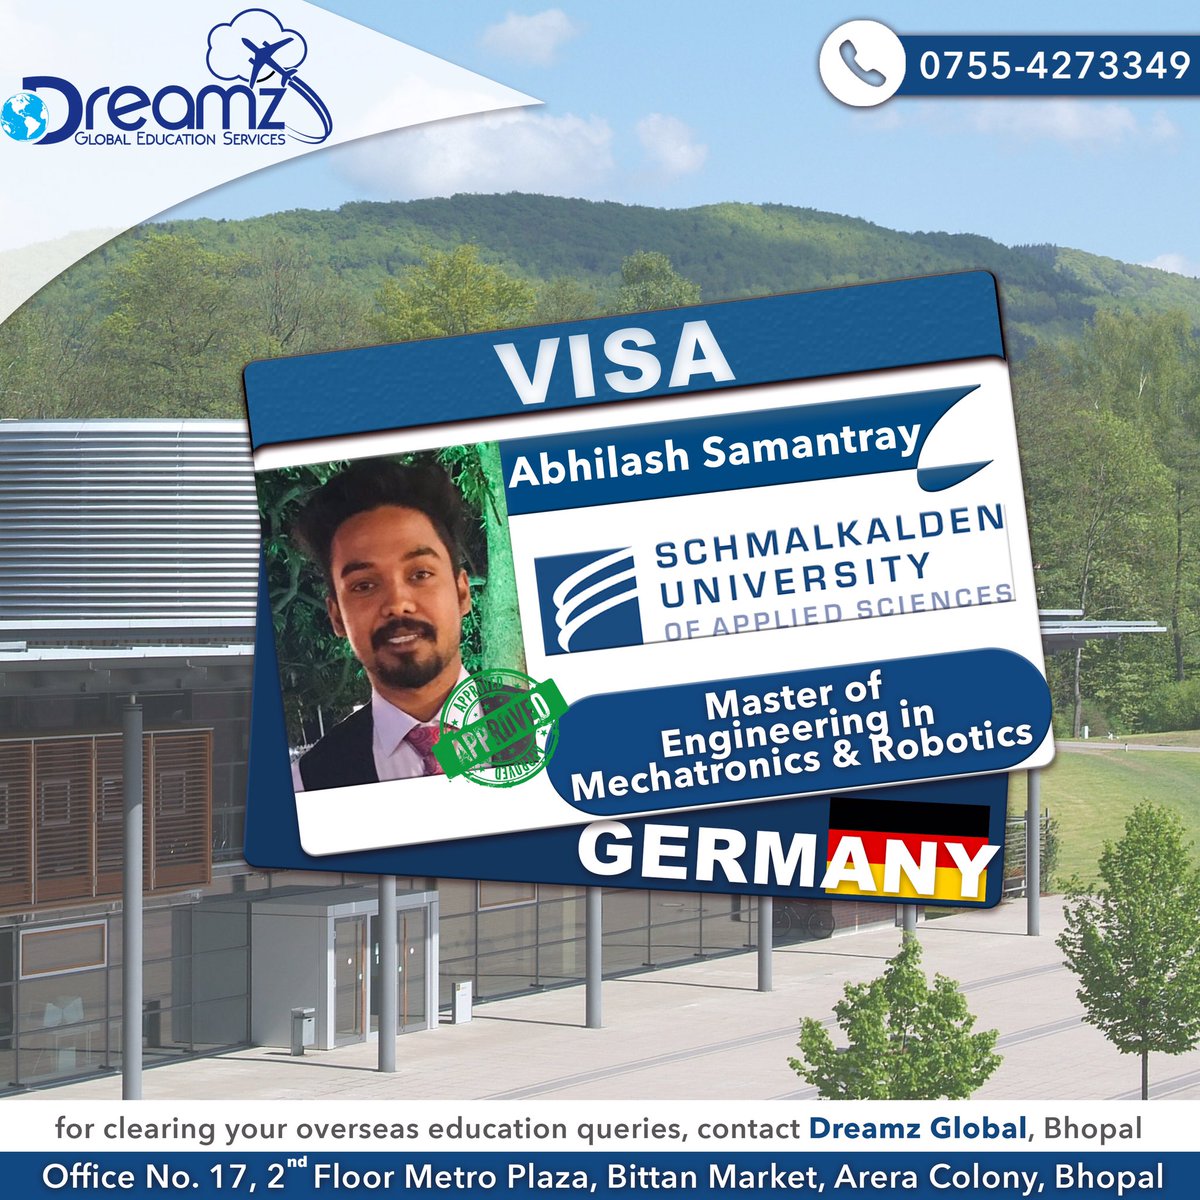 |💐Congratulating #Abhilash Samantray for getting his #VISA approved for pursuing
|#Master of #Engineering in #Mechatronics & #Robotics|
at
|#Schmalkalden_University_of_Applied_Science|
#germanyuniversities #GermanystudyVisa #bhopal #VISA_Provision #Best_VISA_consultancy